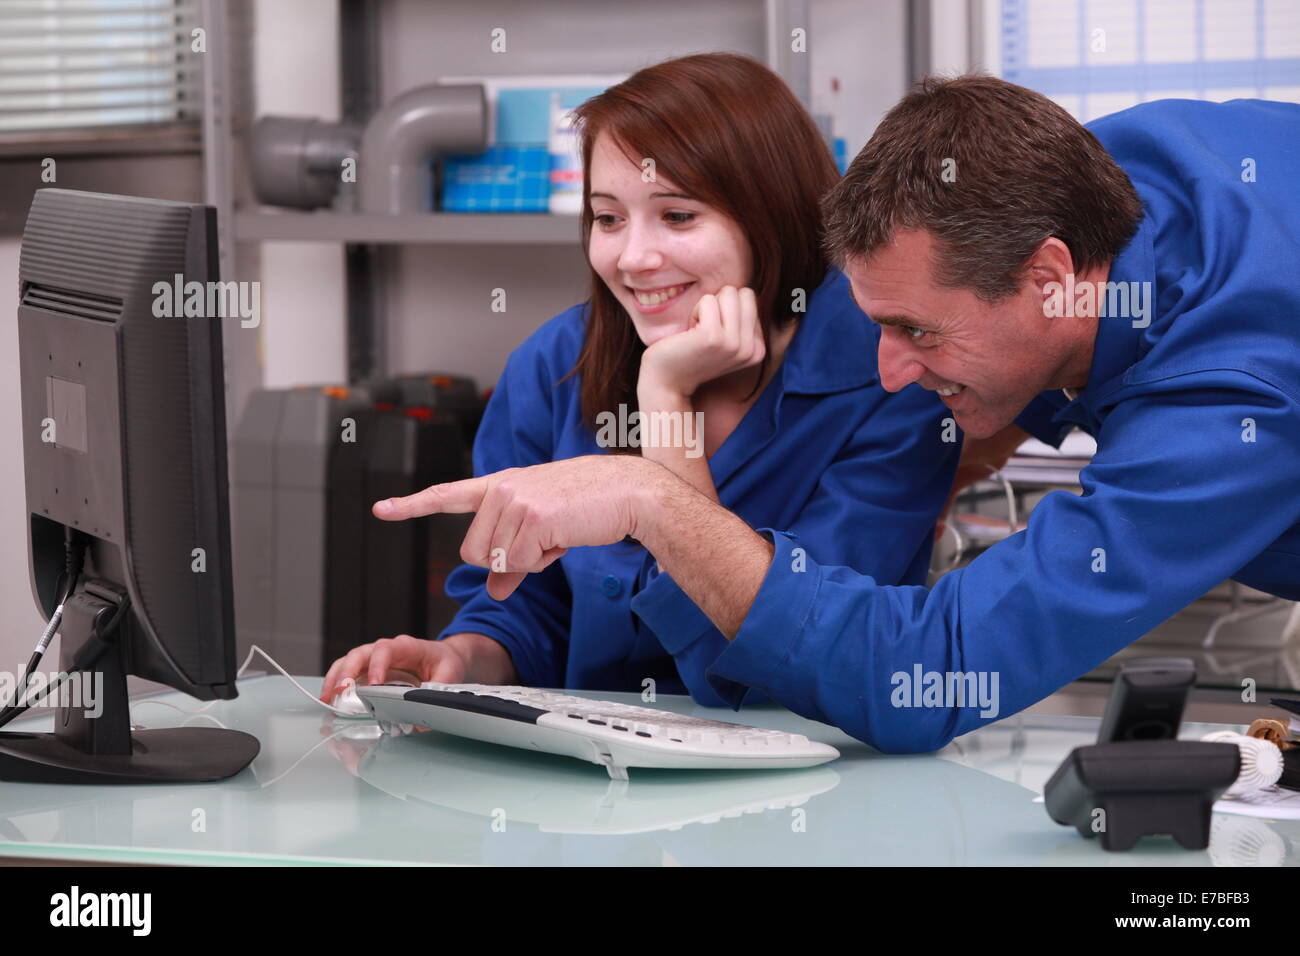 two colleagues in blue jumpsuits Stock Photo